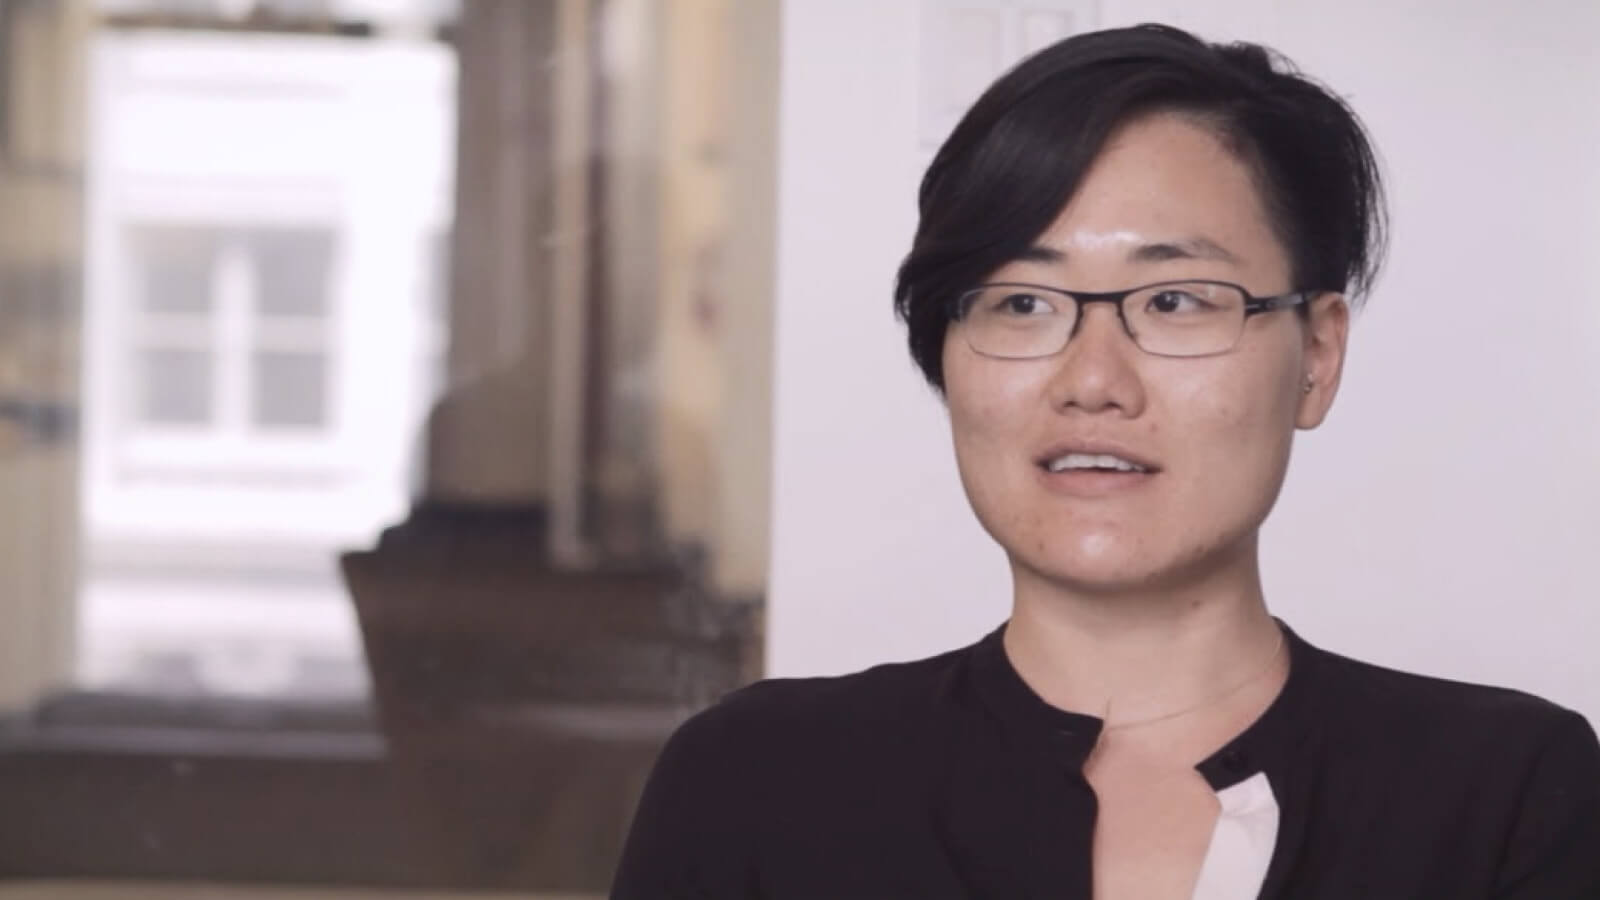 Sarah Nahm on How to Hire Top Talent